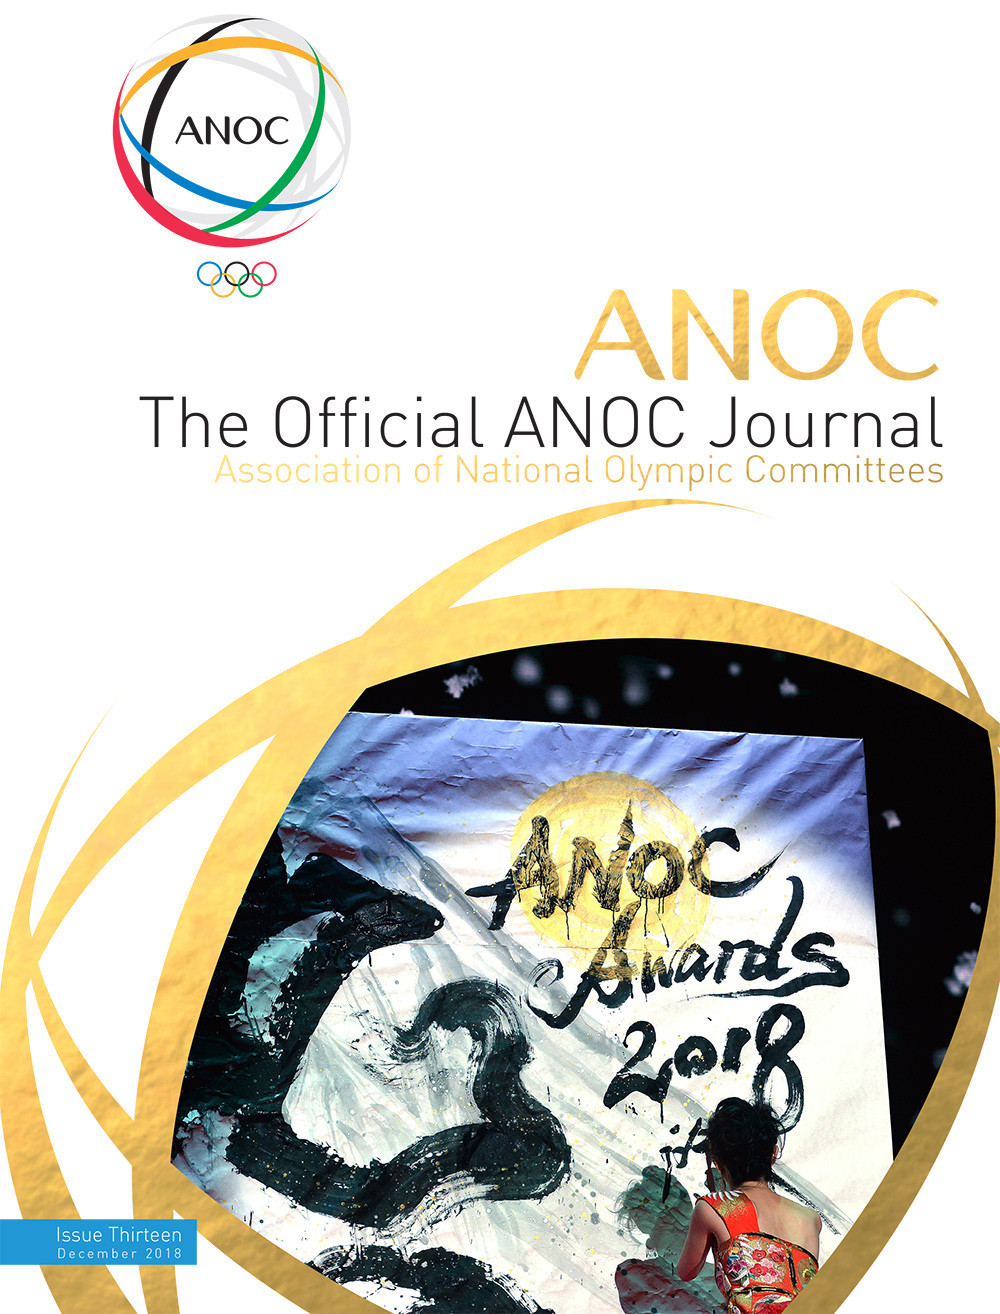 The Official ANOC Journal - Issue 13